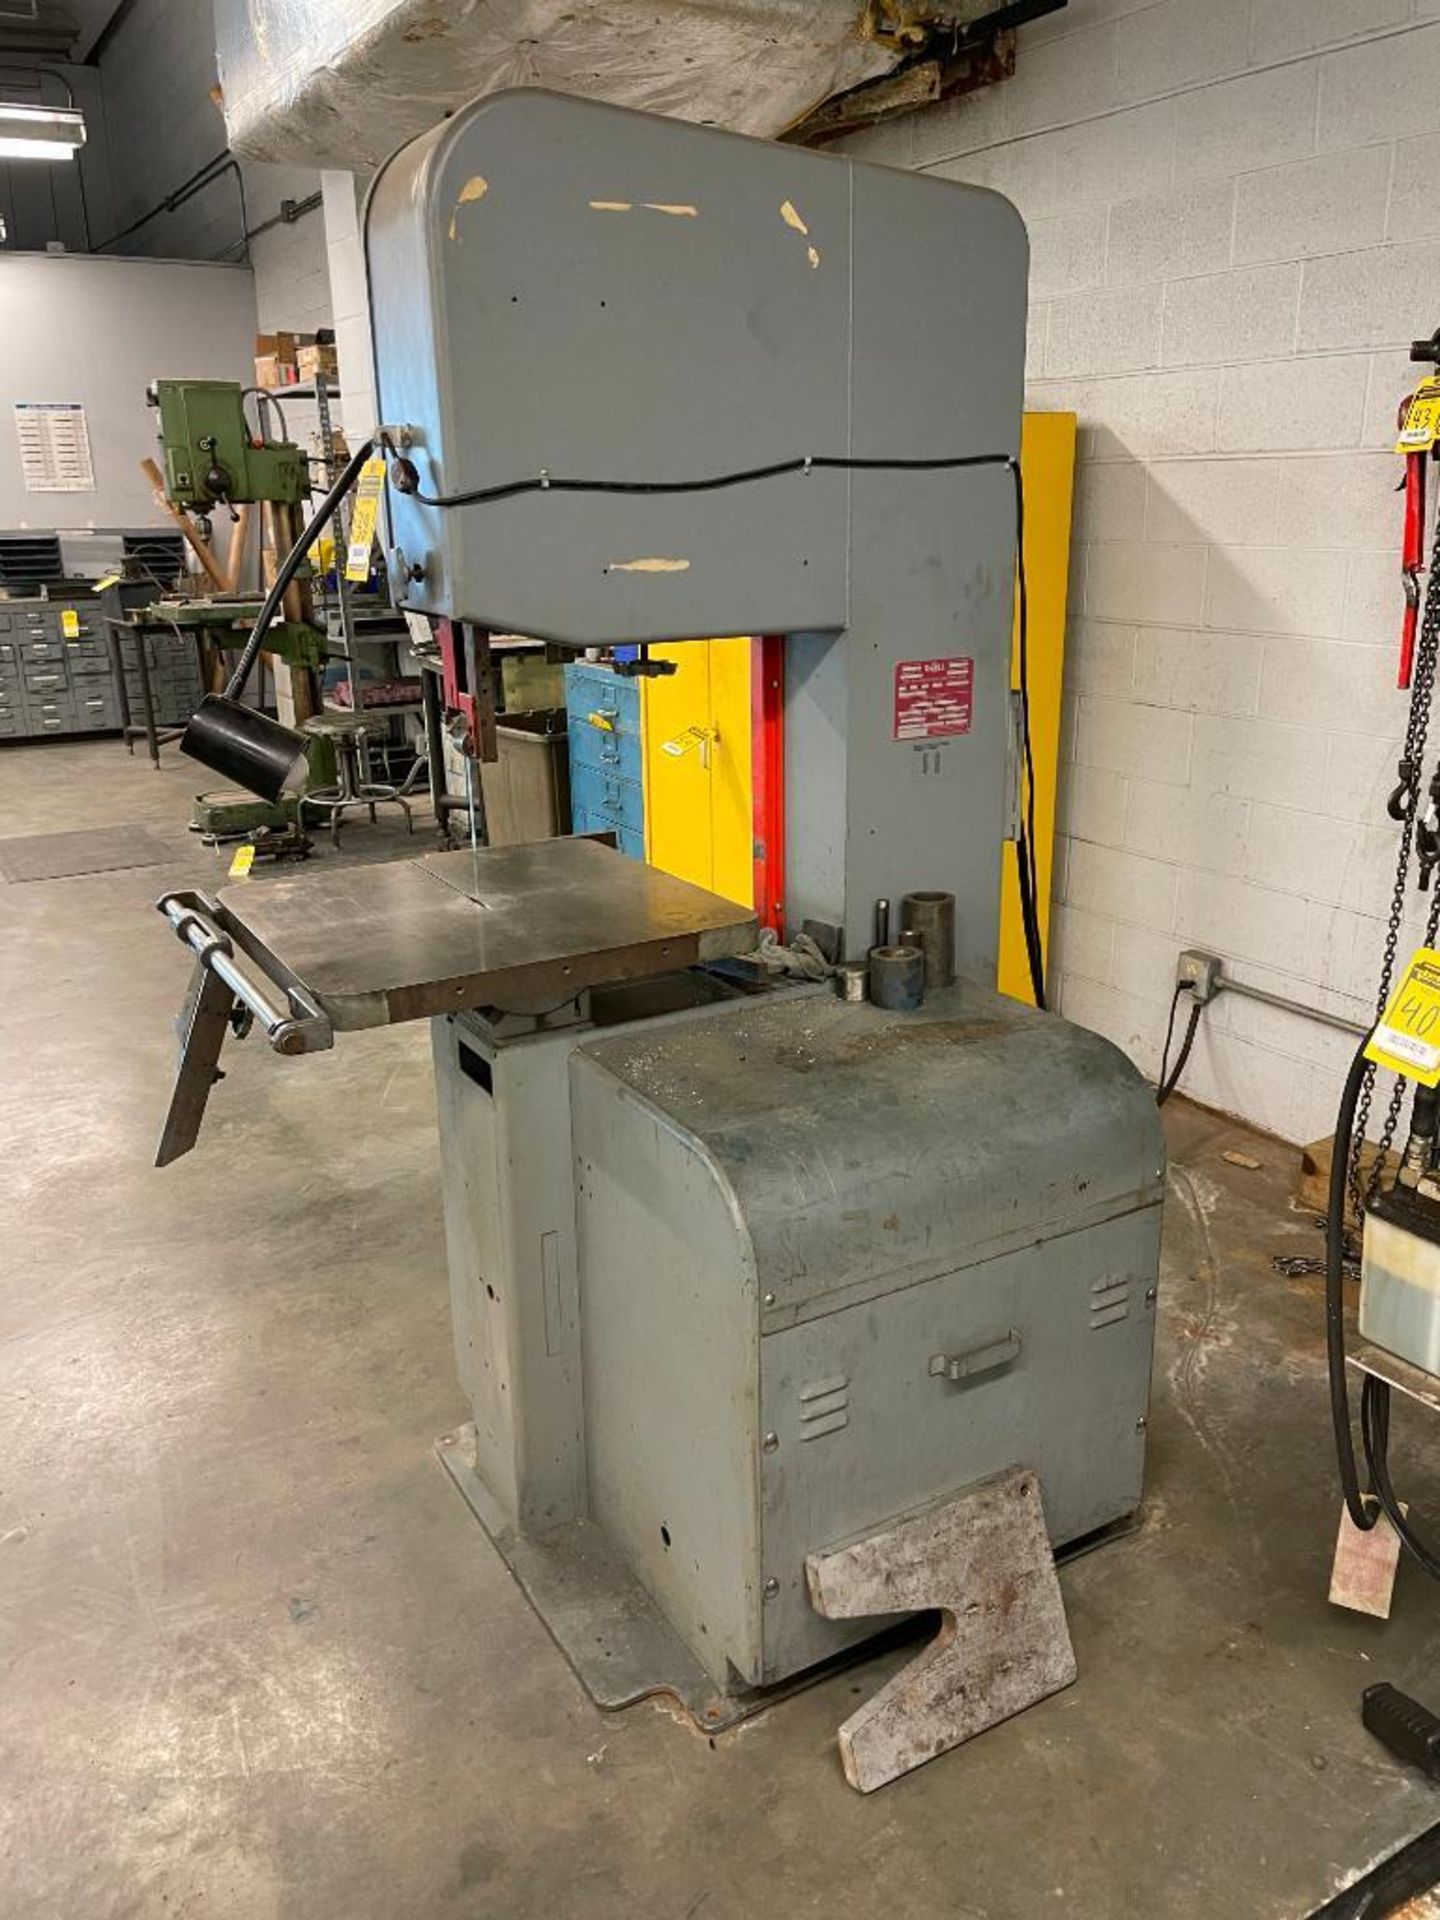 DOALL VERTICAL BAND SAW, VARIABLE SPEED, 14'' THROAT, MODEL DBW-15, S/N 290-8513430 - Image 2 of 2